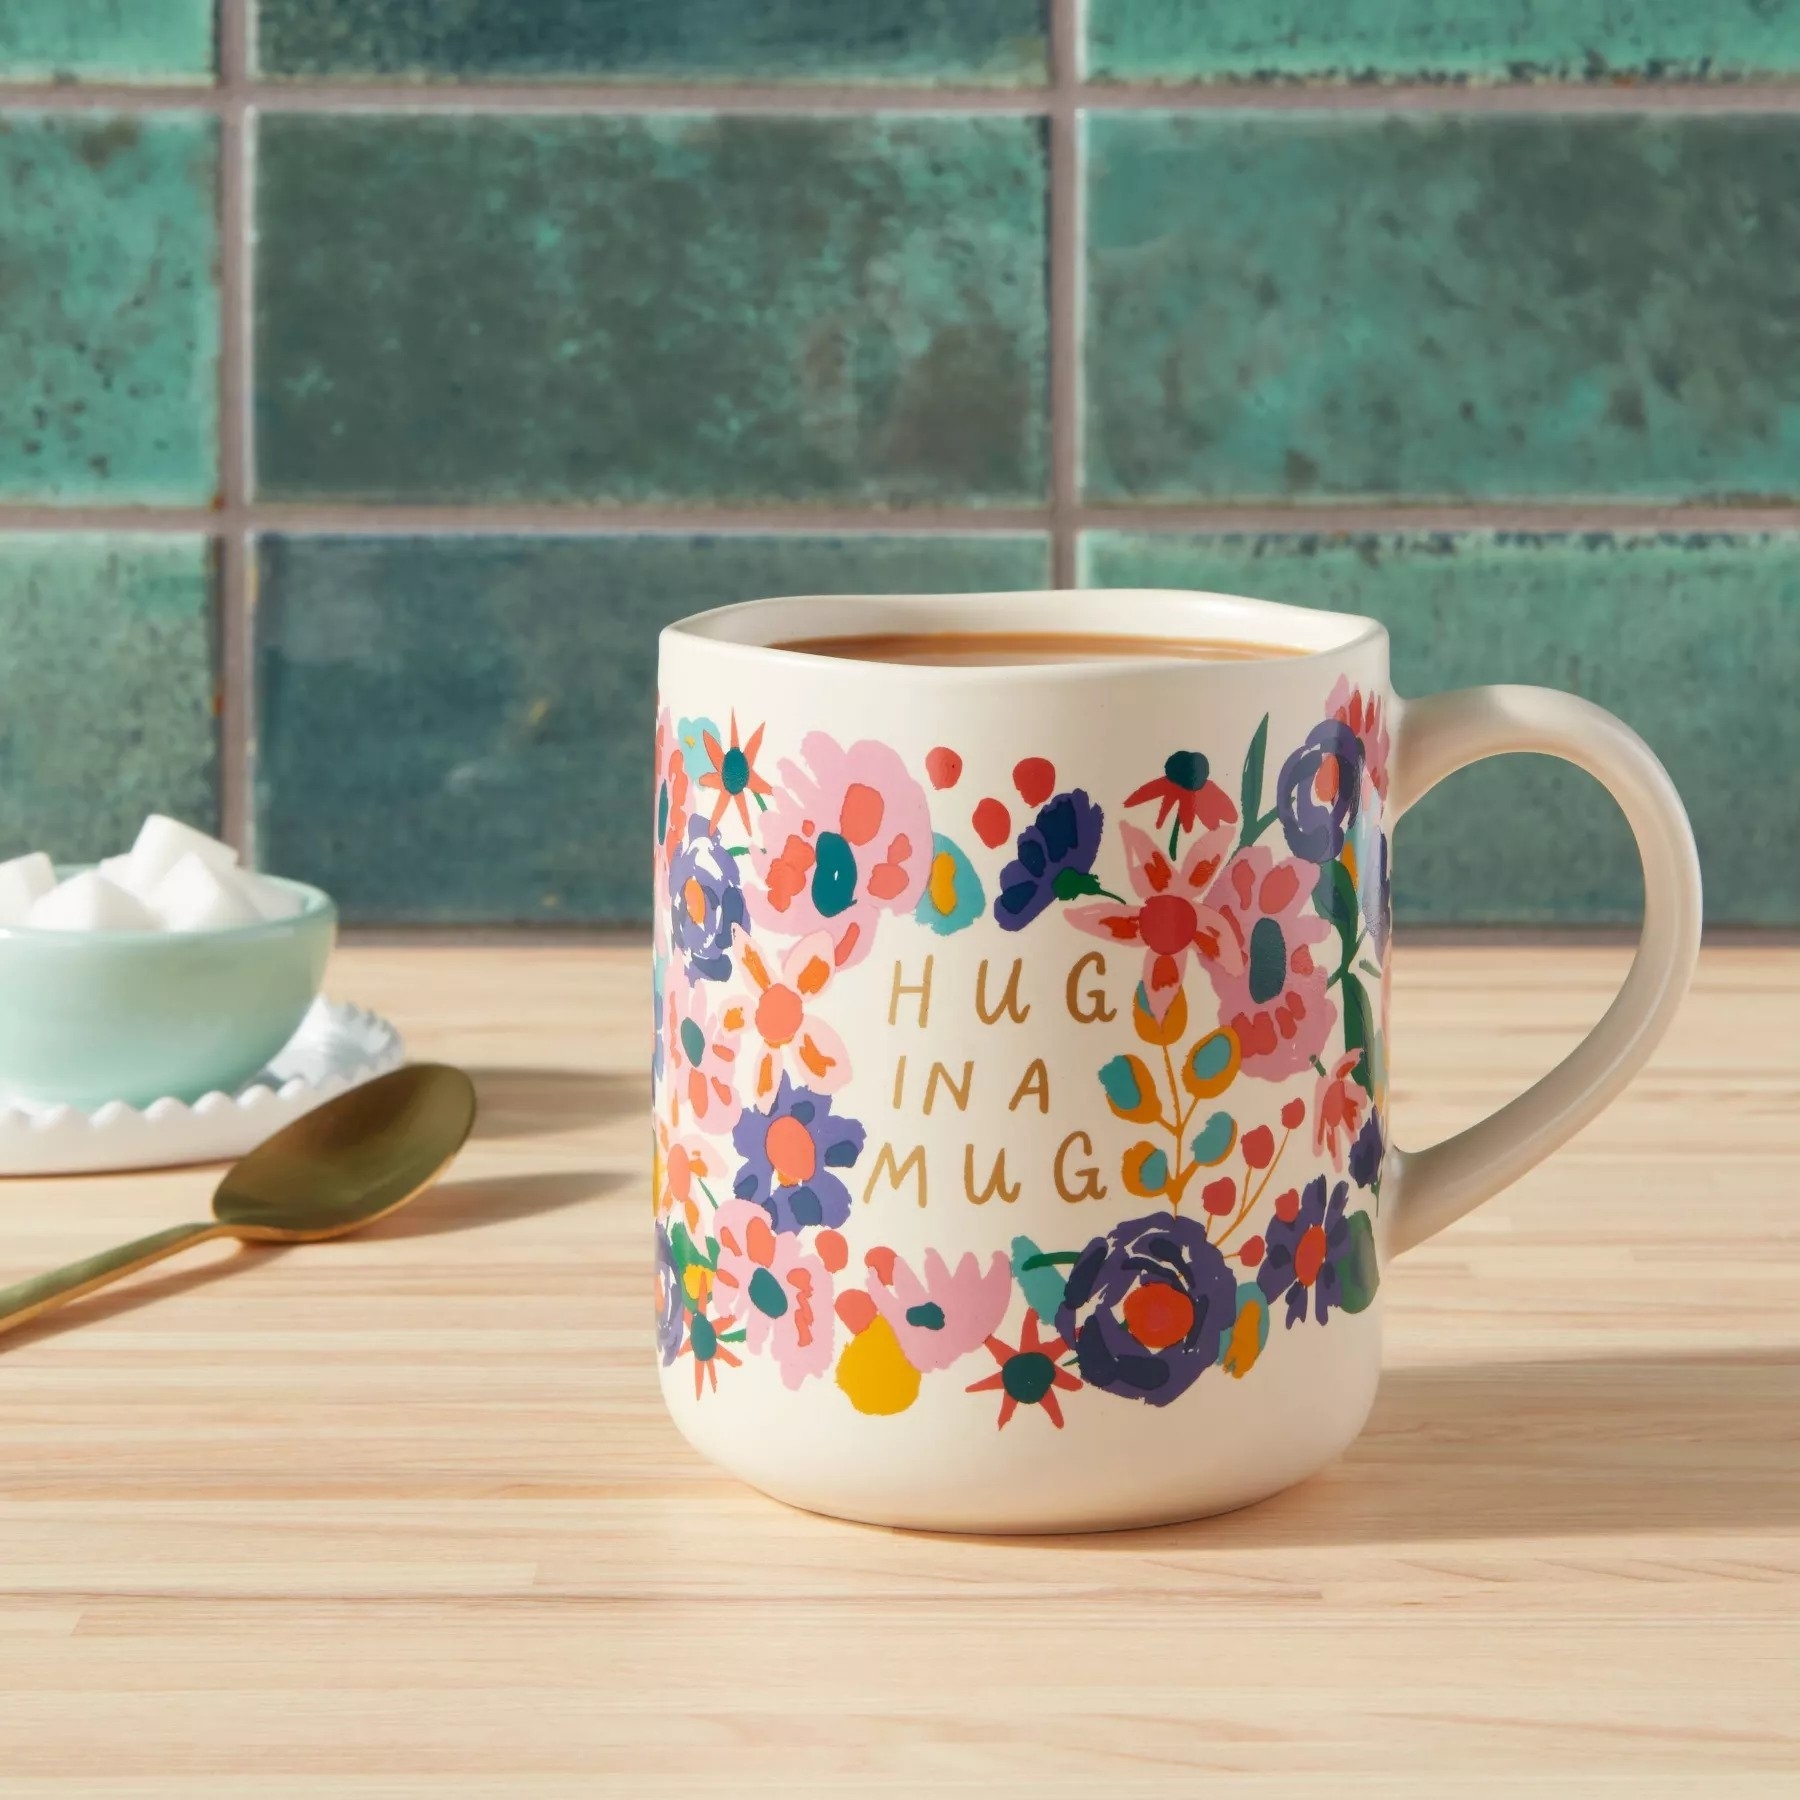 The mug featuring a floral design and the words hugs in a mug in the front